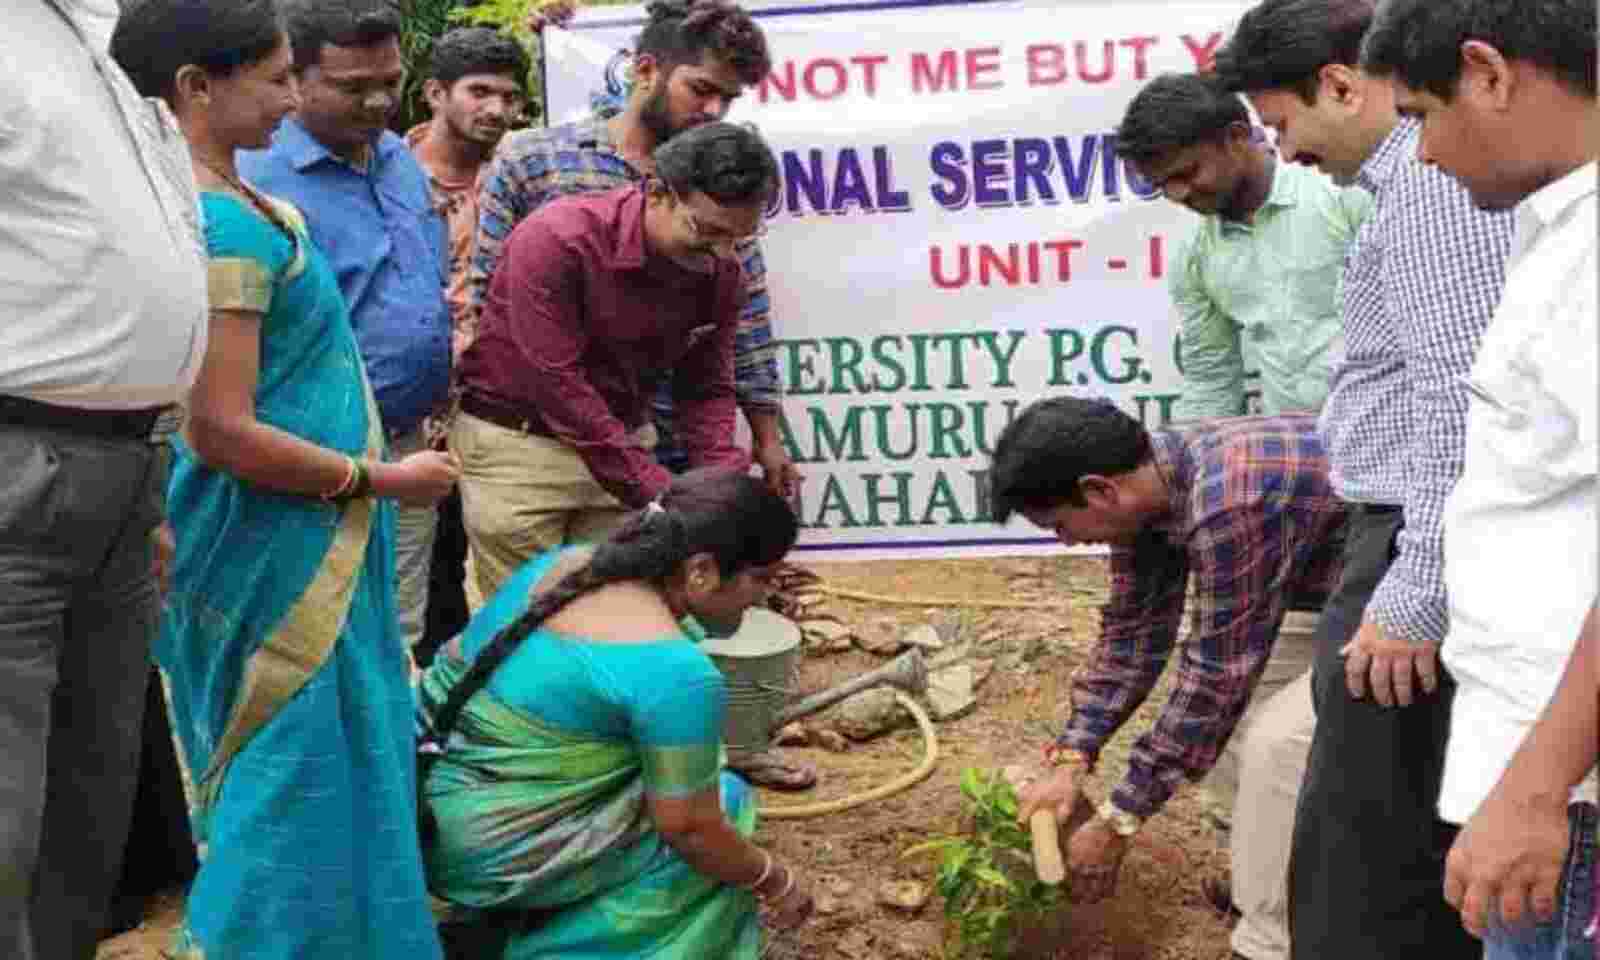 Plant more trees to protect the environment